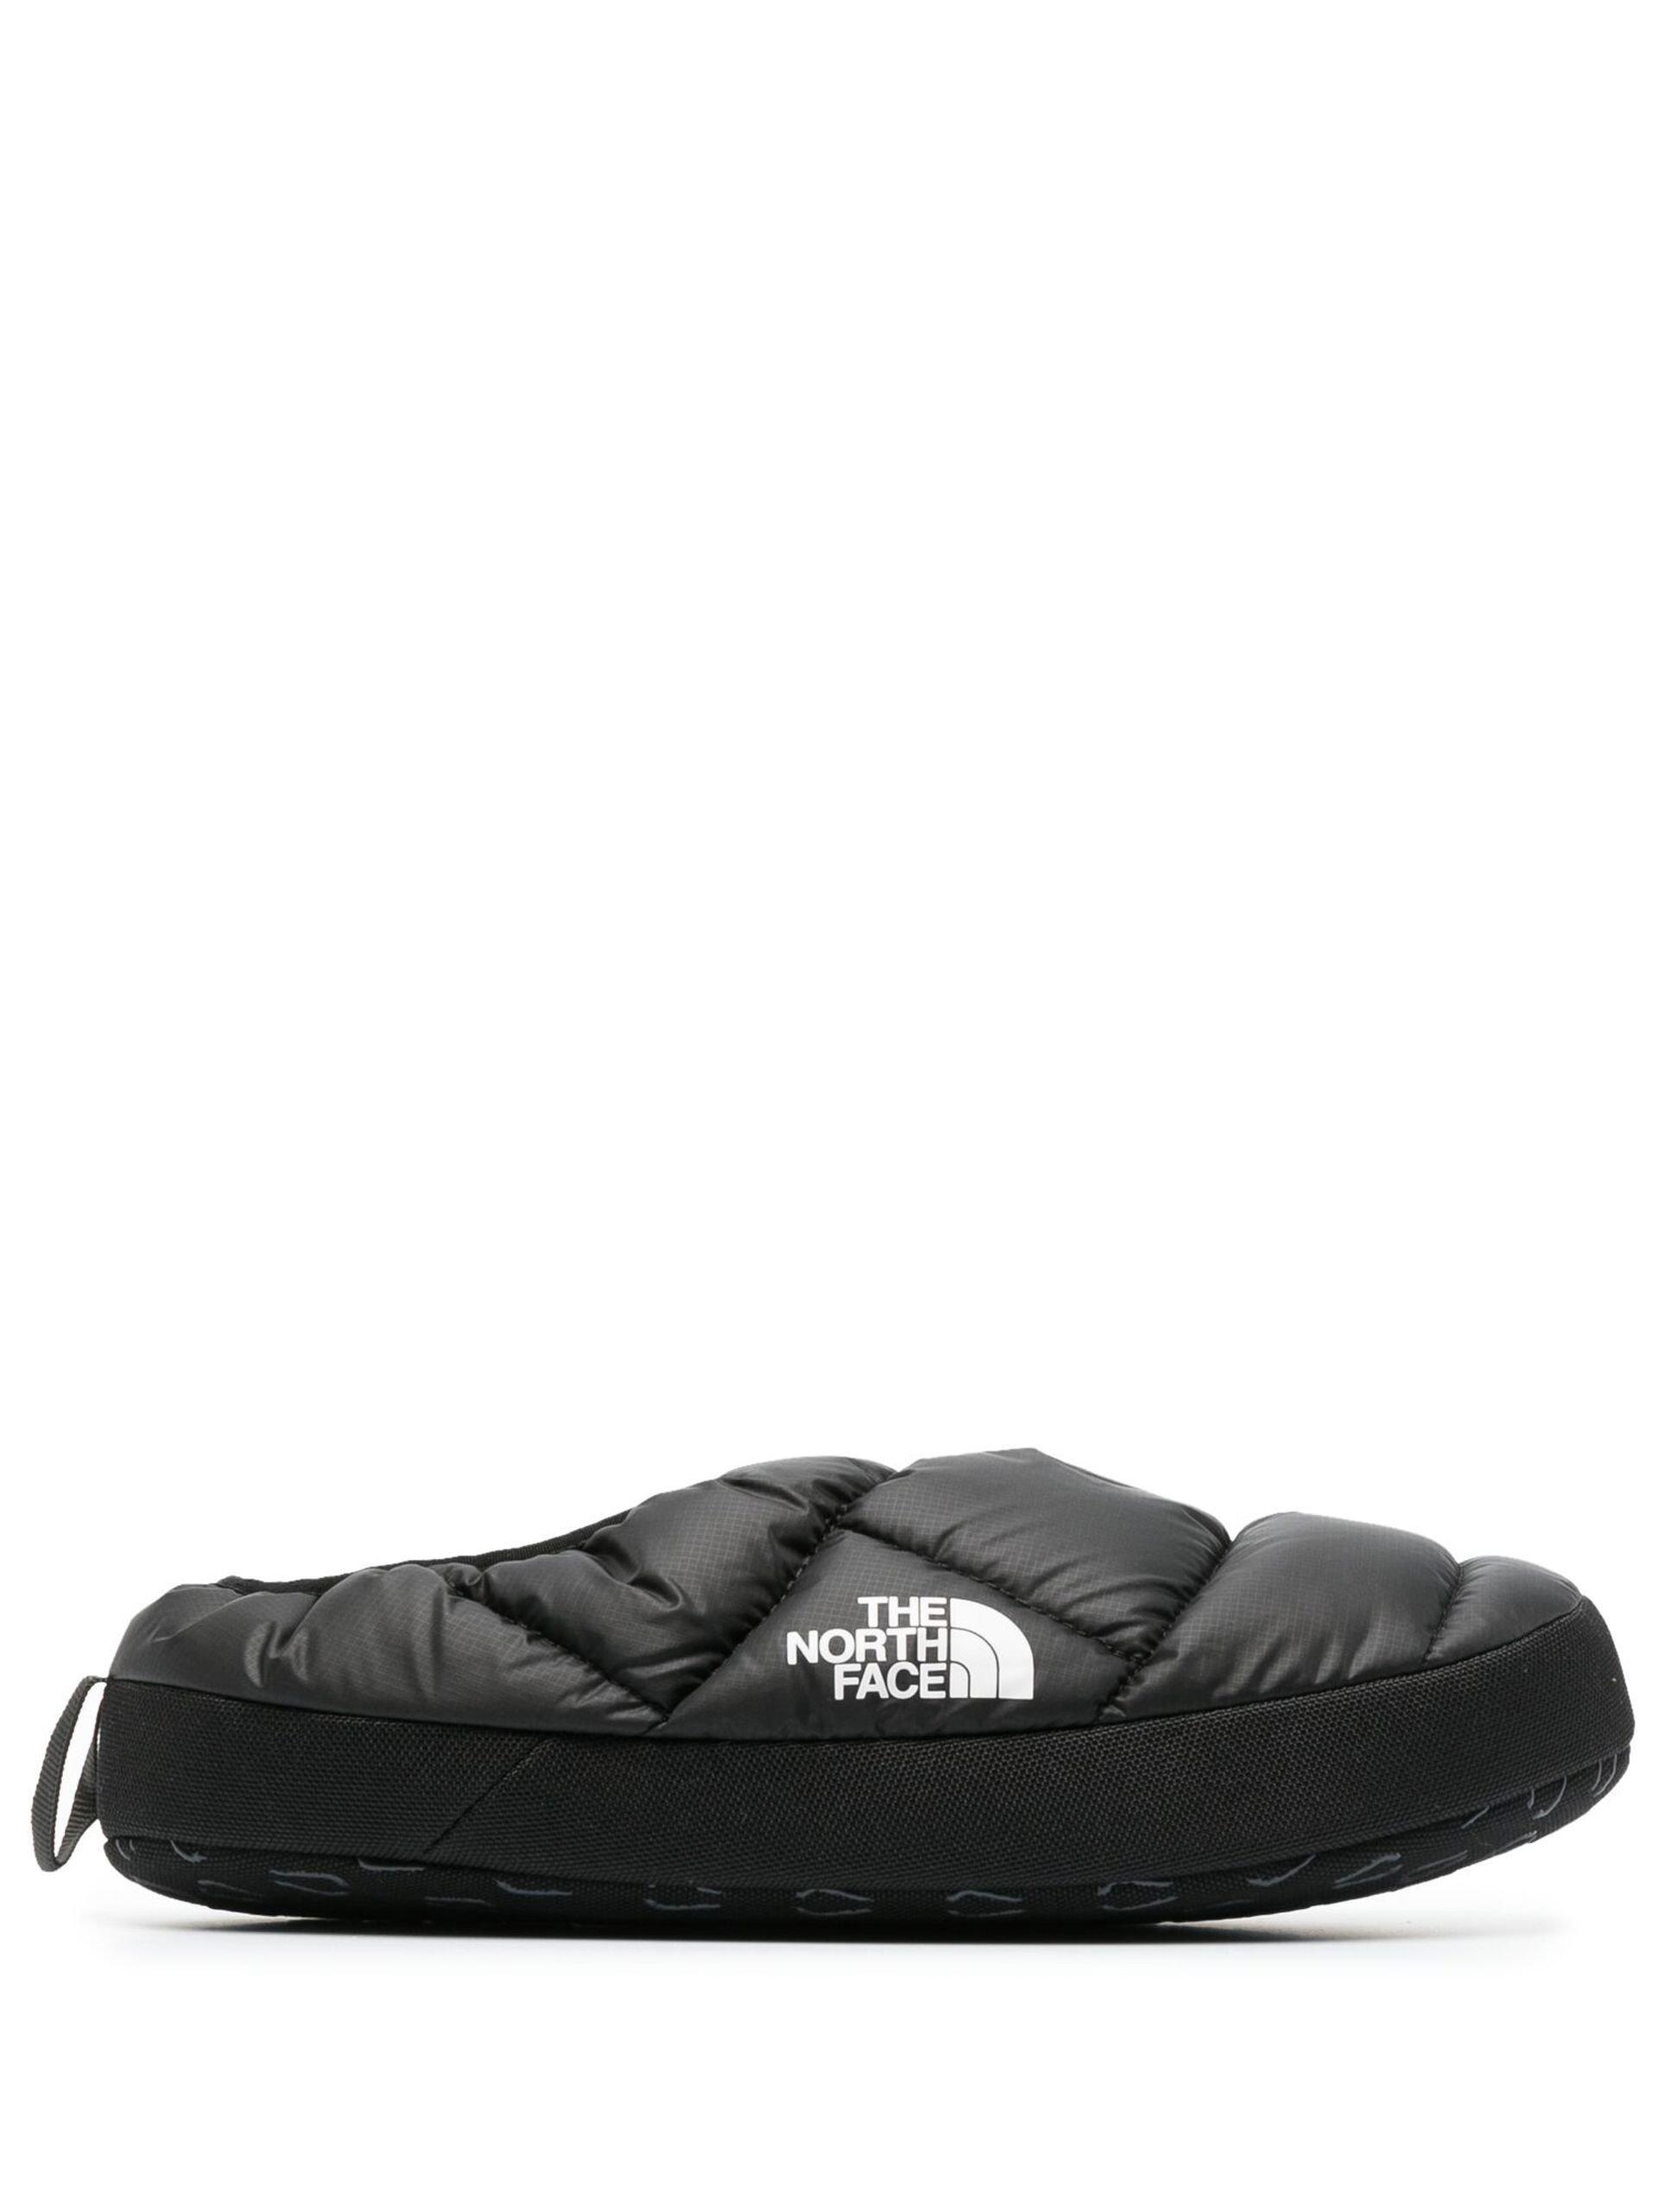 At placere Mathis accent The North Face Black Nse Iii Tent Winter Mule Slippers for Men | Lyst